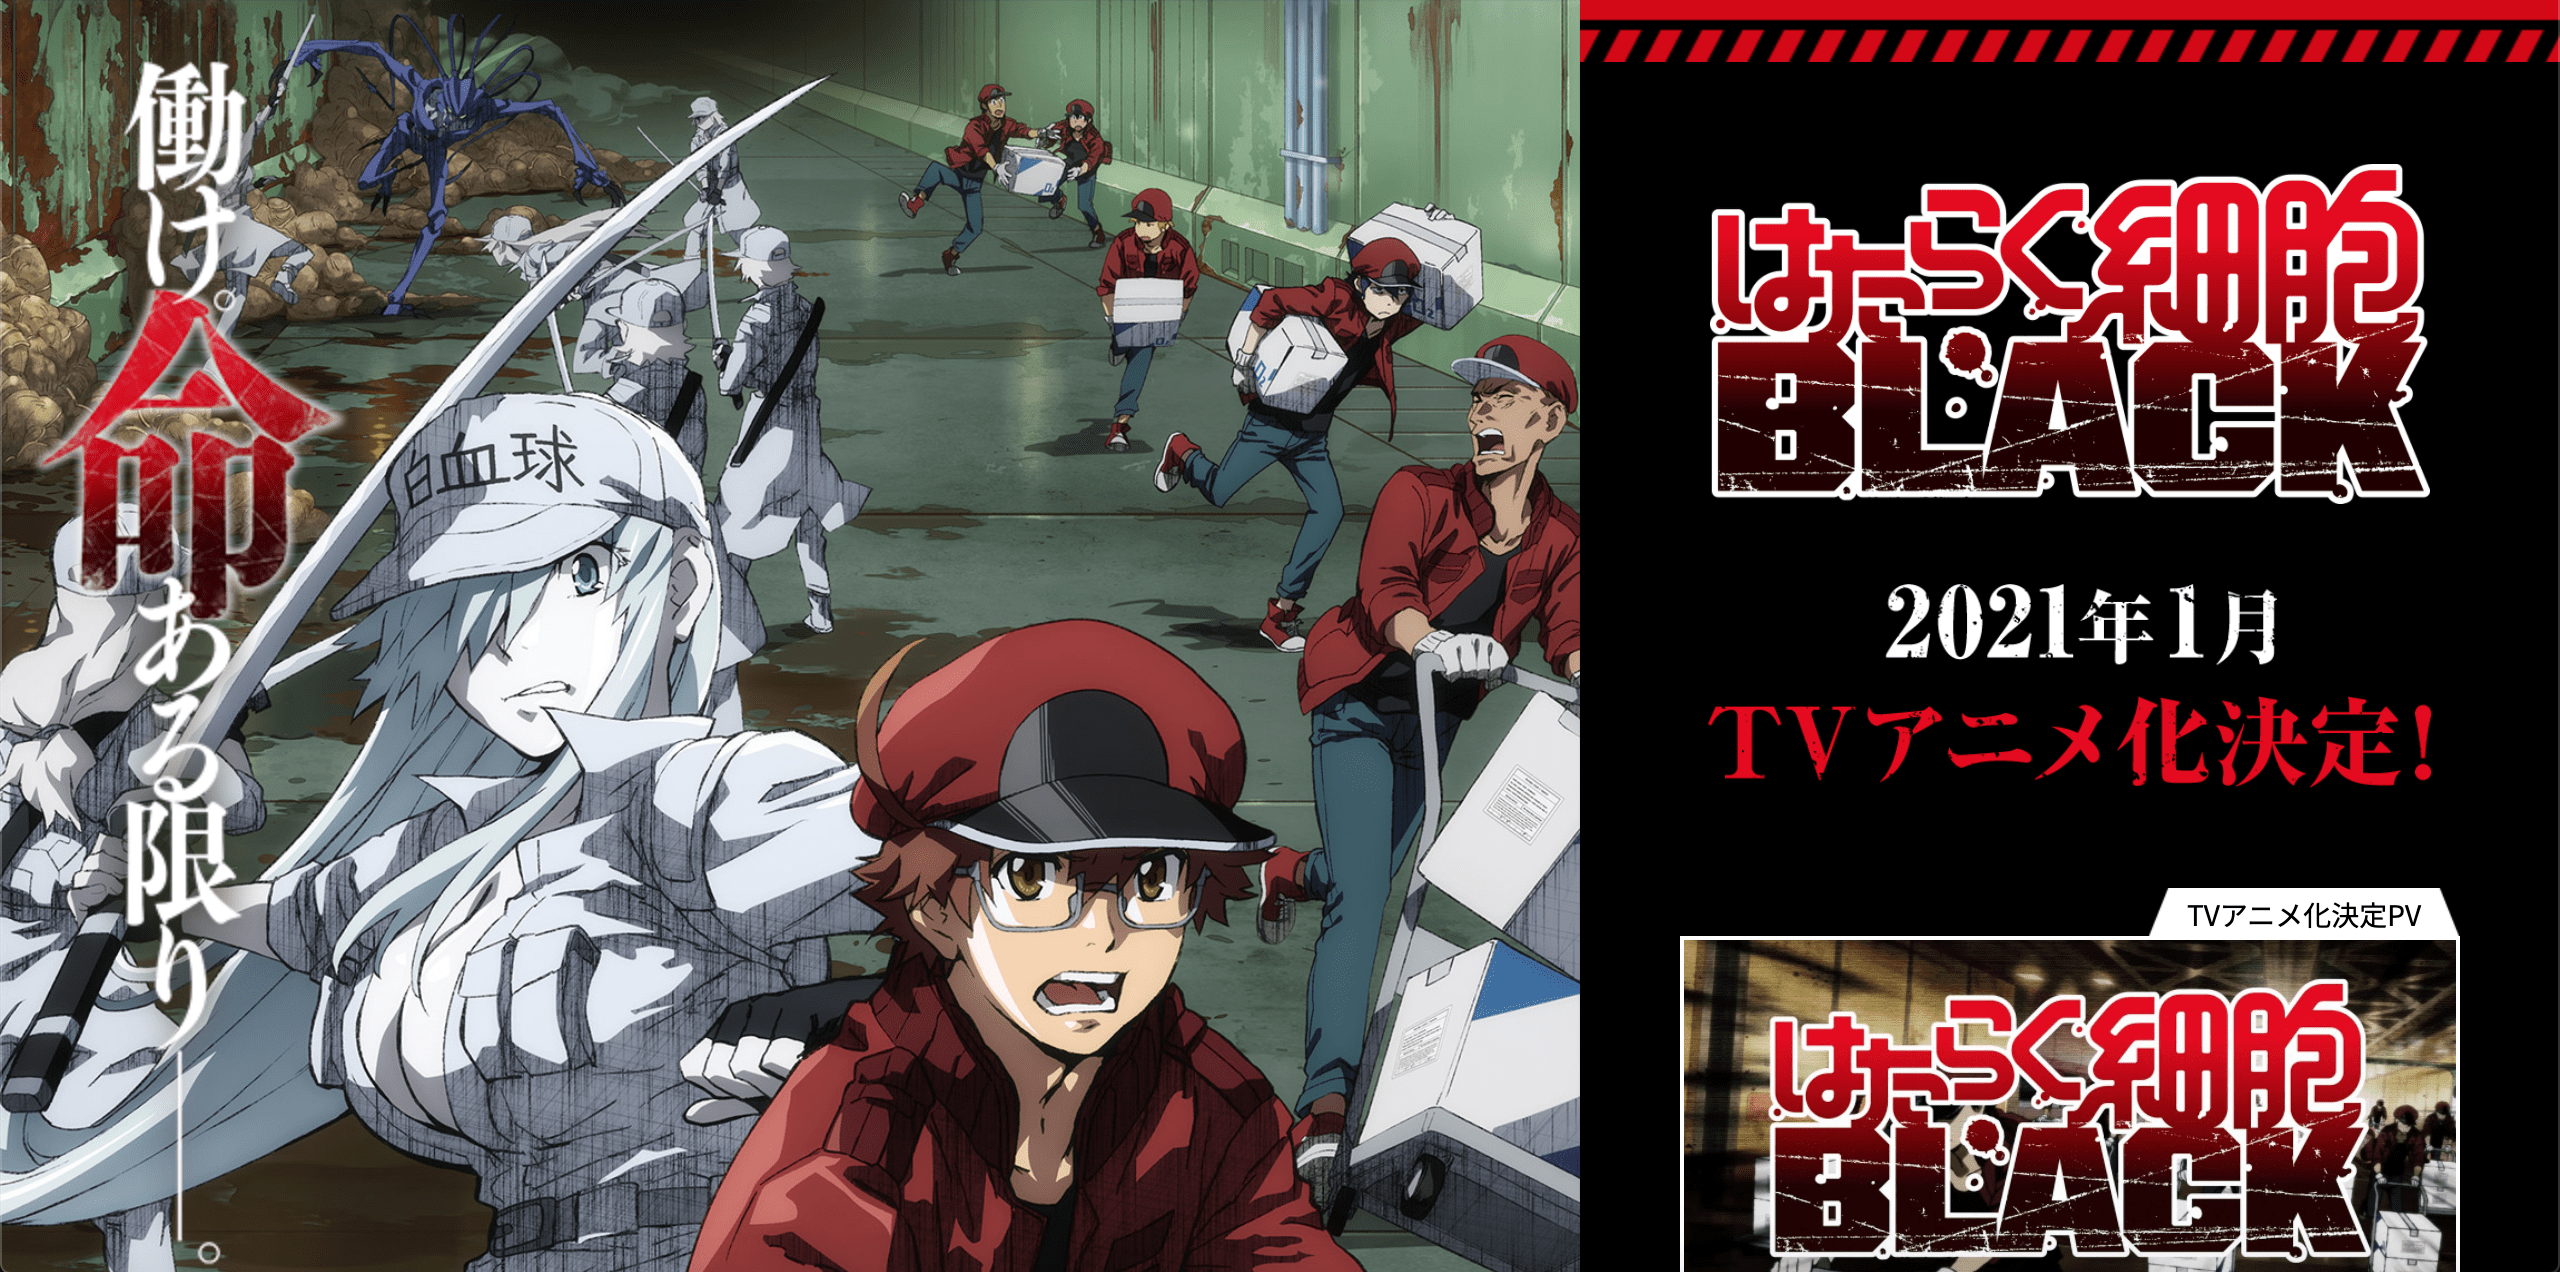 Cells-at-Work-Blac-anime